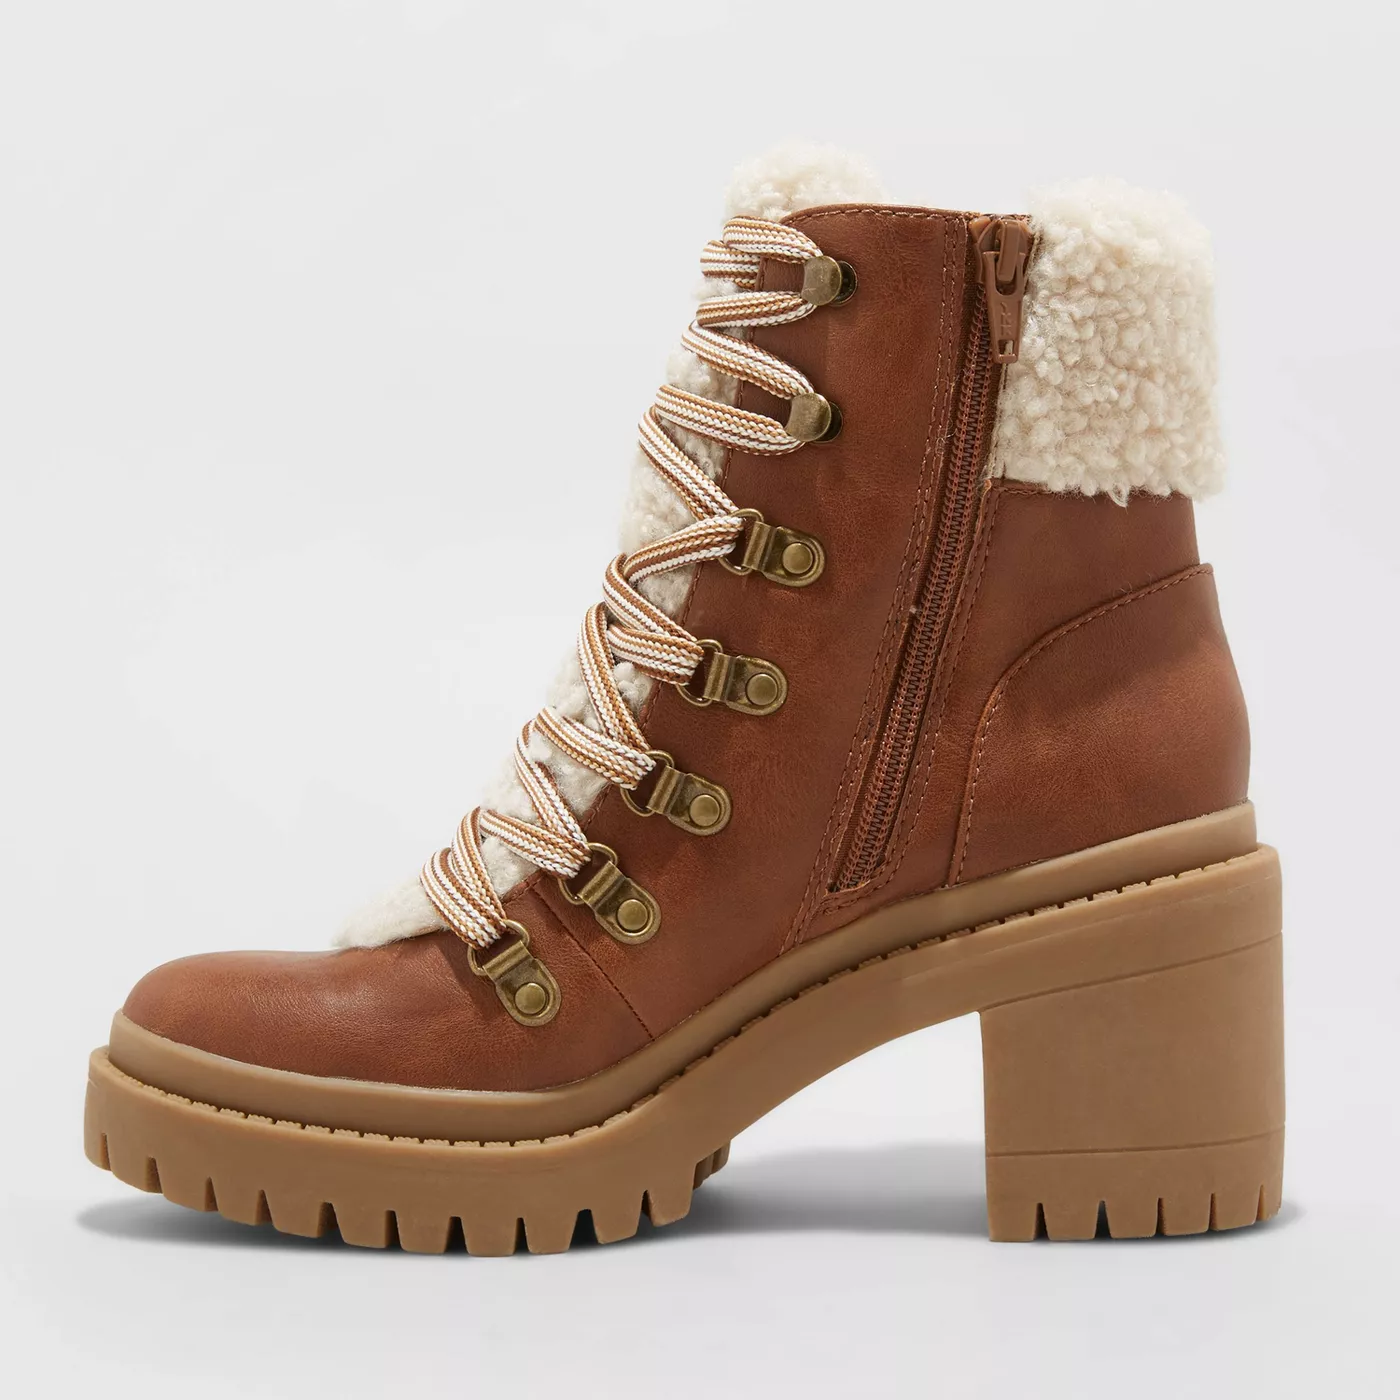 Women's Aubrie Heeled Hiking Boots - Universal Thread™ - image 2 of 8